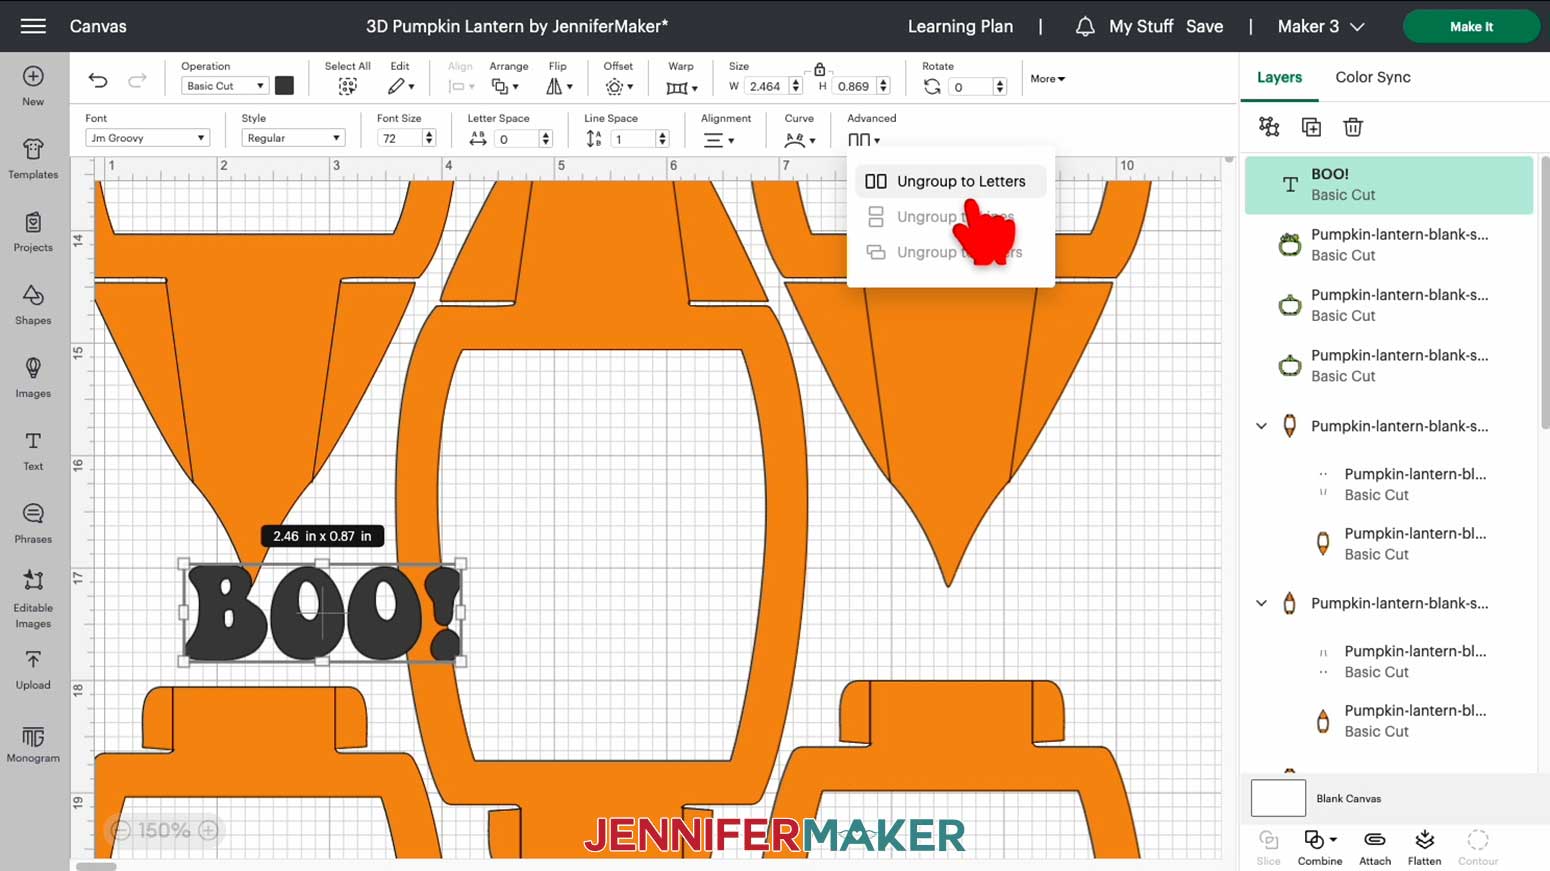 Click Ungroup to Letters in Cricut Design Space in order to move each letter individually for the 3D pumpkin lantern custom word